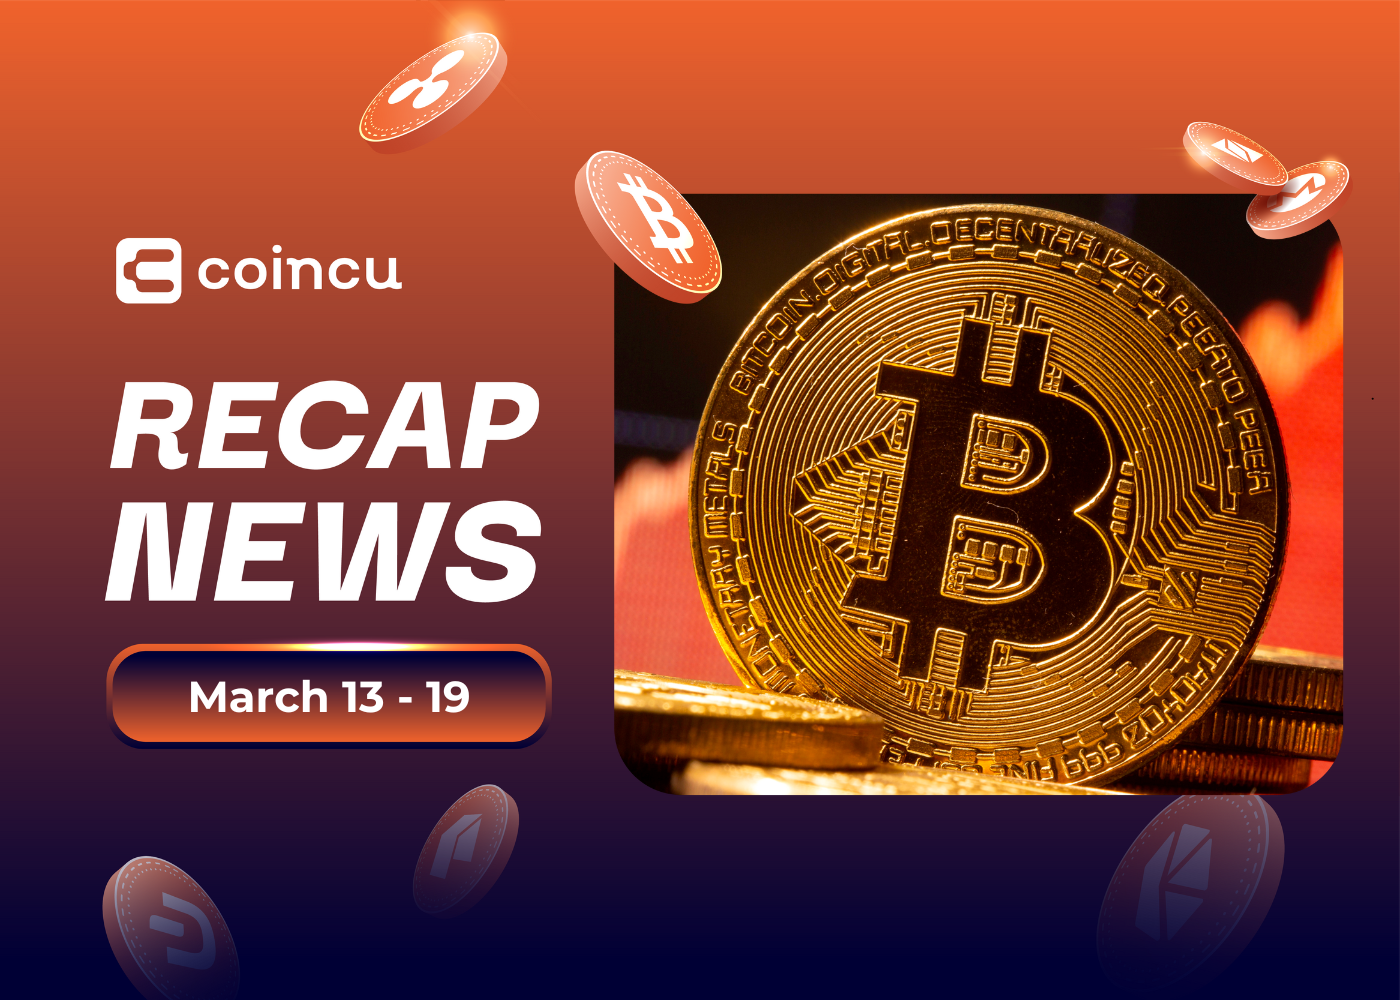 Weekly Top Crypto News (March 13 - March 19)